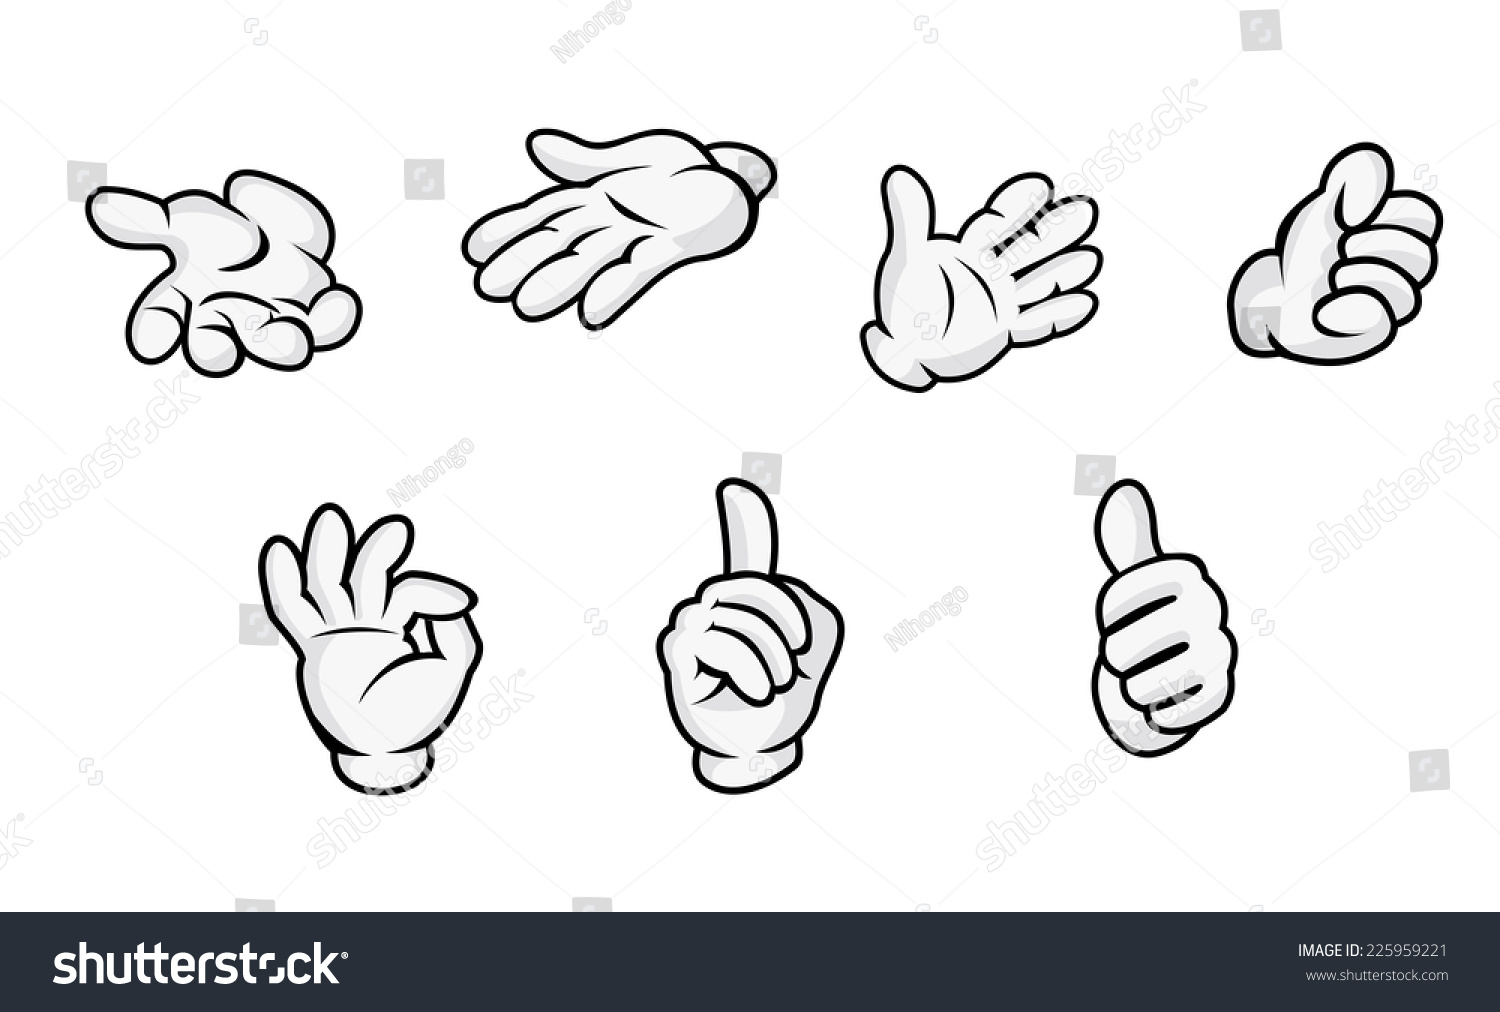 Cartoon Hands With Gestures Isolated On White Background. Vector ...